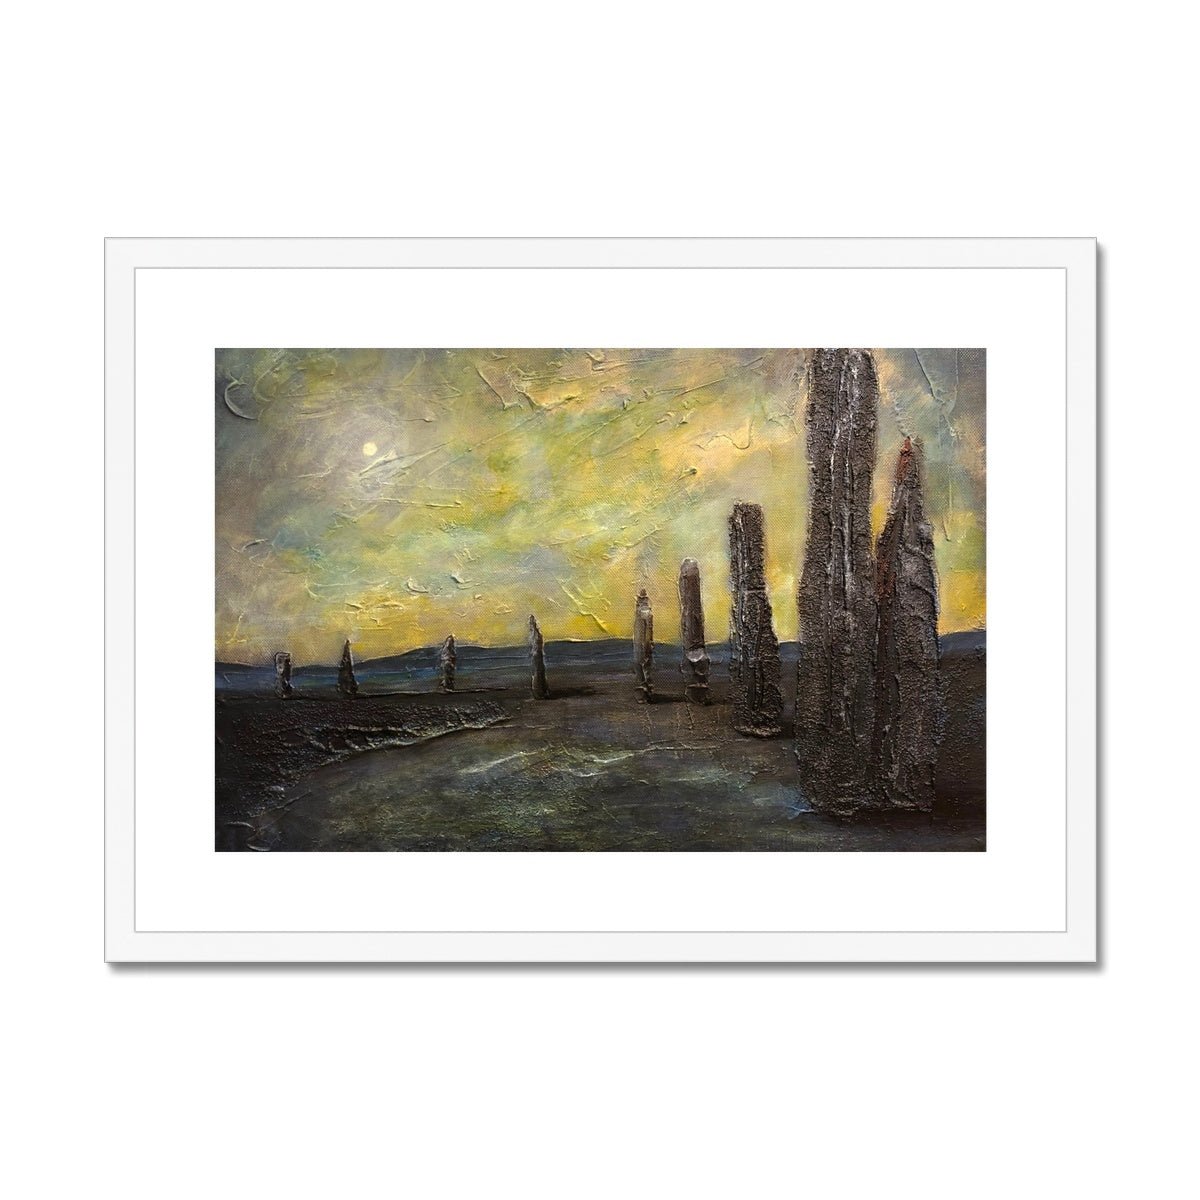 An Ethereal Ring Of Brodgar Orkney Painting | Framed & Mounted Prints From Scotland-Framed & Mounted Prints-Orkney Art Gallery-A2 Landscape-White Frame-Paintings, Prints, Homeware, Art Gifts From Scotland By Scottish Artist Kevin Hunter